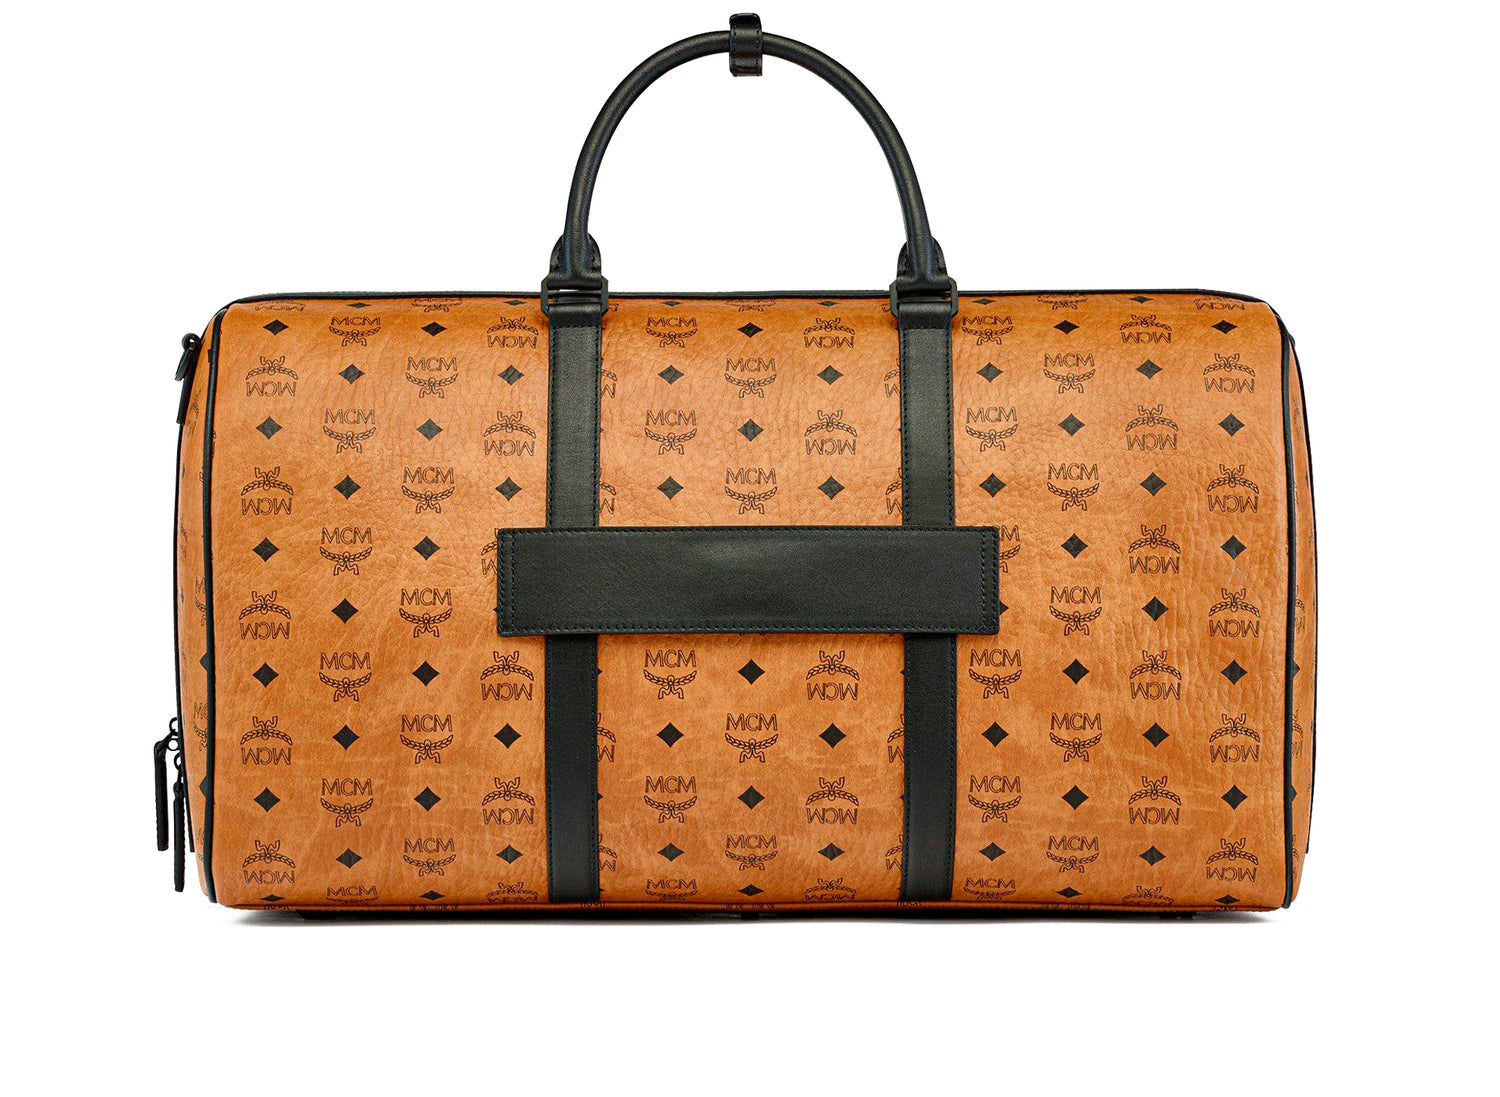 MCM Ottomar MVCSY02 Large Weekender Travel Bag In Visetos and Nappa Leather  - Cognac 